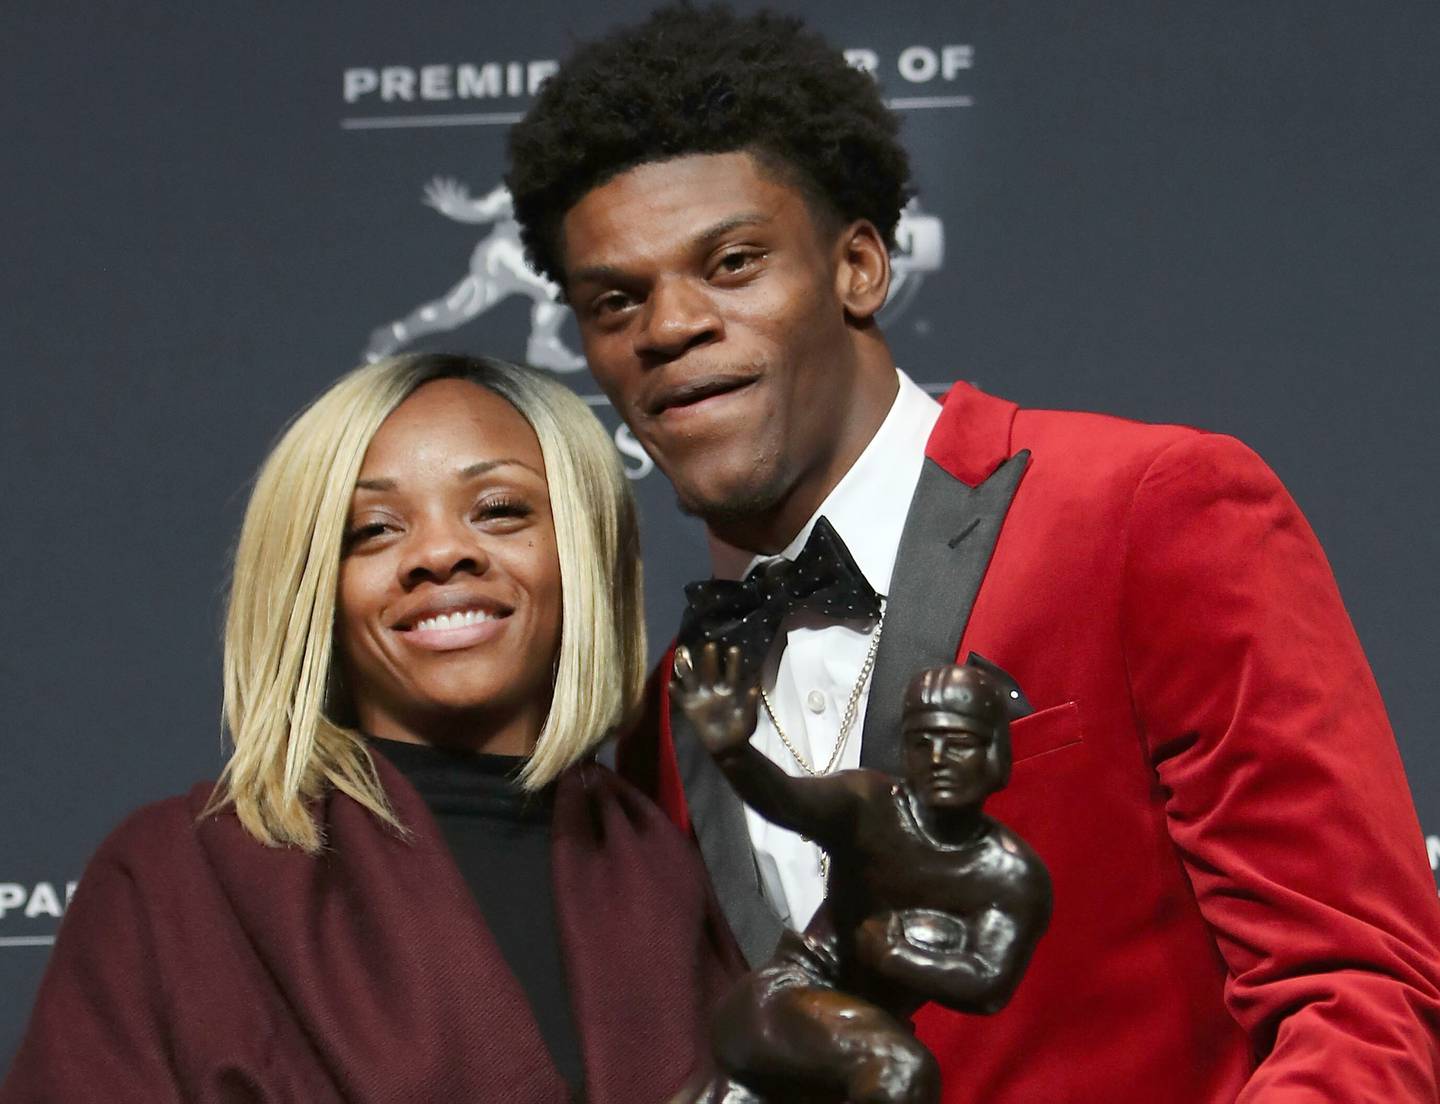 NEW YORK, NY - DECEMBER 10:  Lamar Jackson of the Louisville Cardinals poses for a photo with his mother, Felicia Jones, after being named the 82nd Heisman Memorial Trophy Award winner during the 2016 Heisman Trophy Presentation at the Marriott Marquis on December 10, 2016 in New York City.